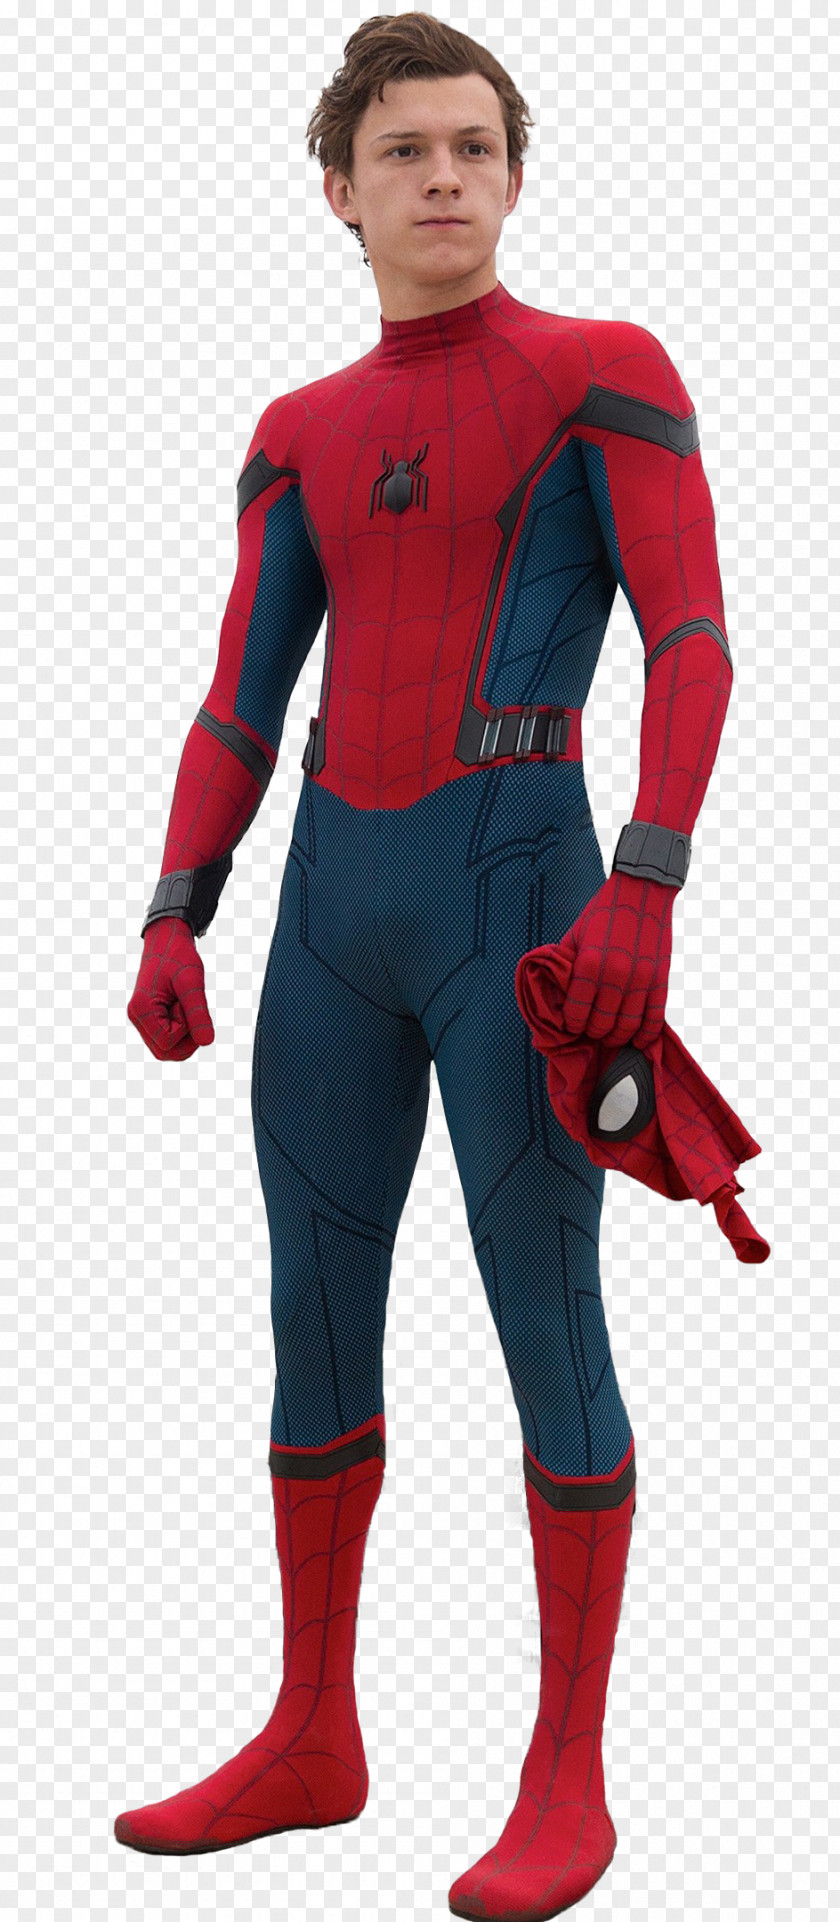 Iron Spiderman Tom Holland Spider-Man: Homecoming Film Series Marvel Cinematic Universe PNG